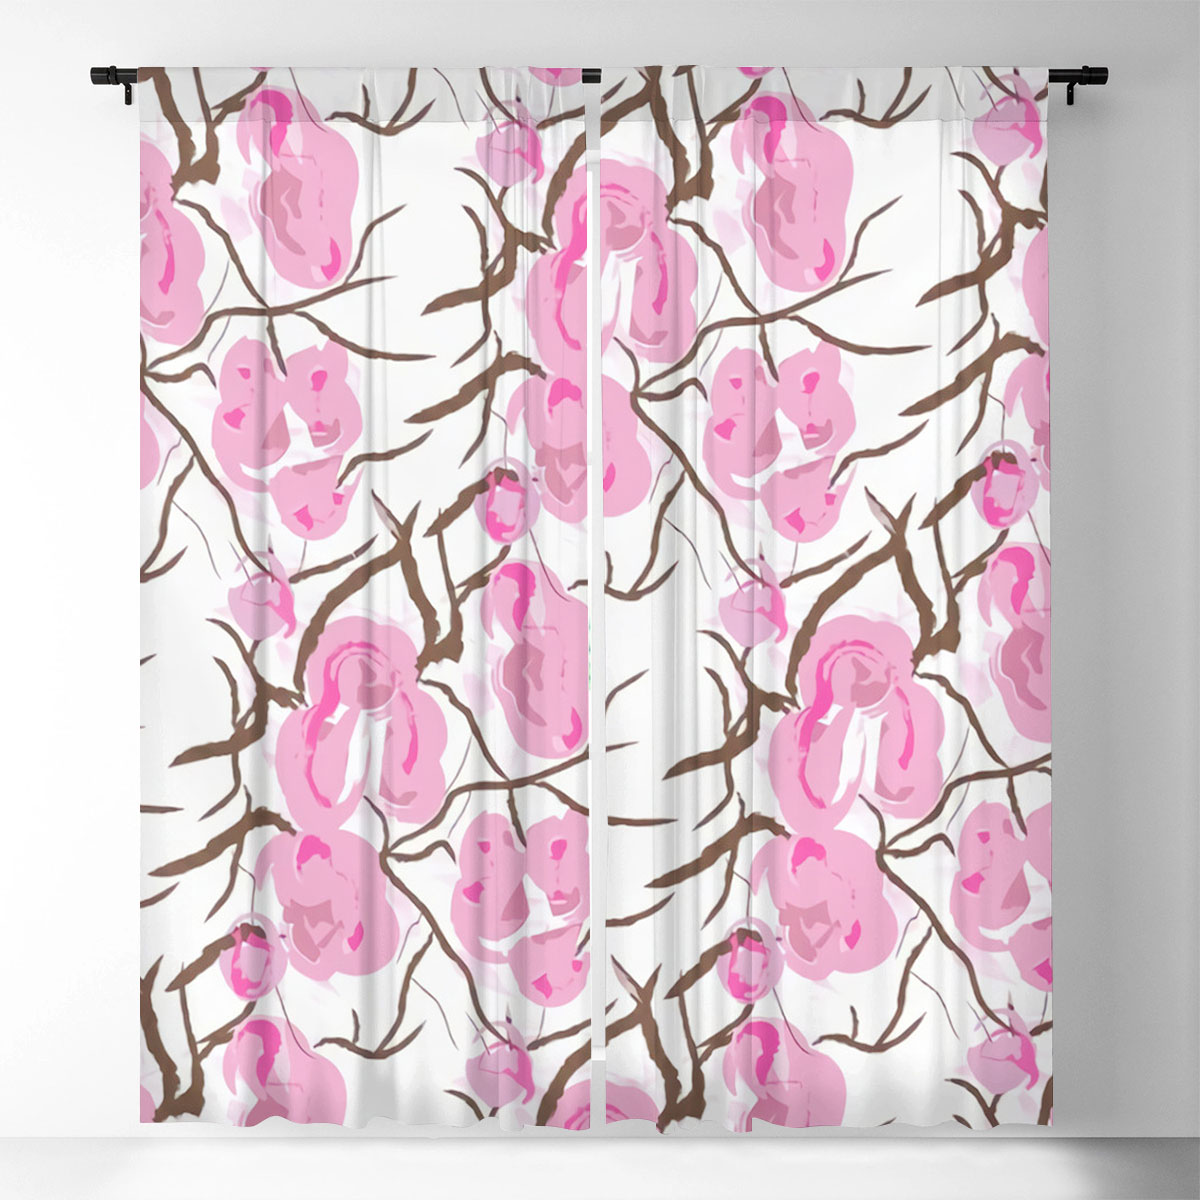 Abstract Cherry Blossom Window Curtain